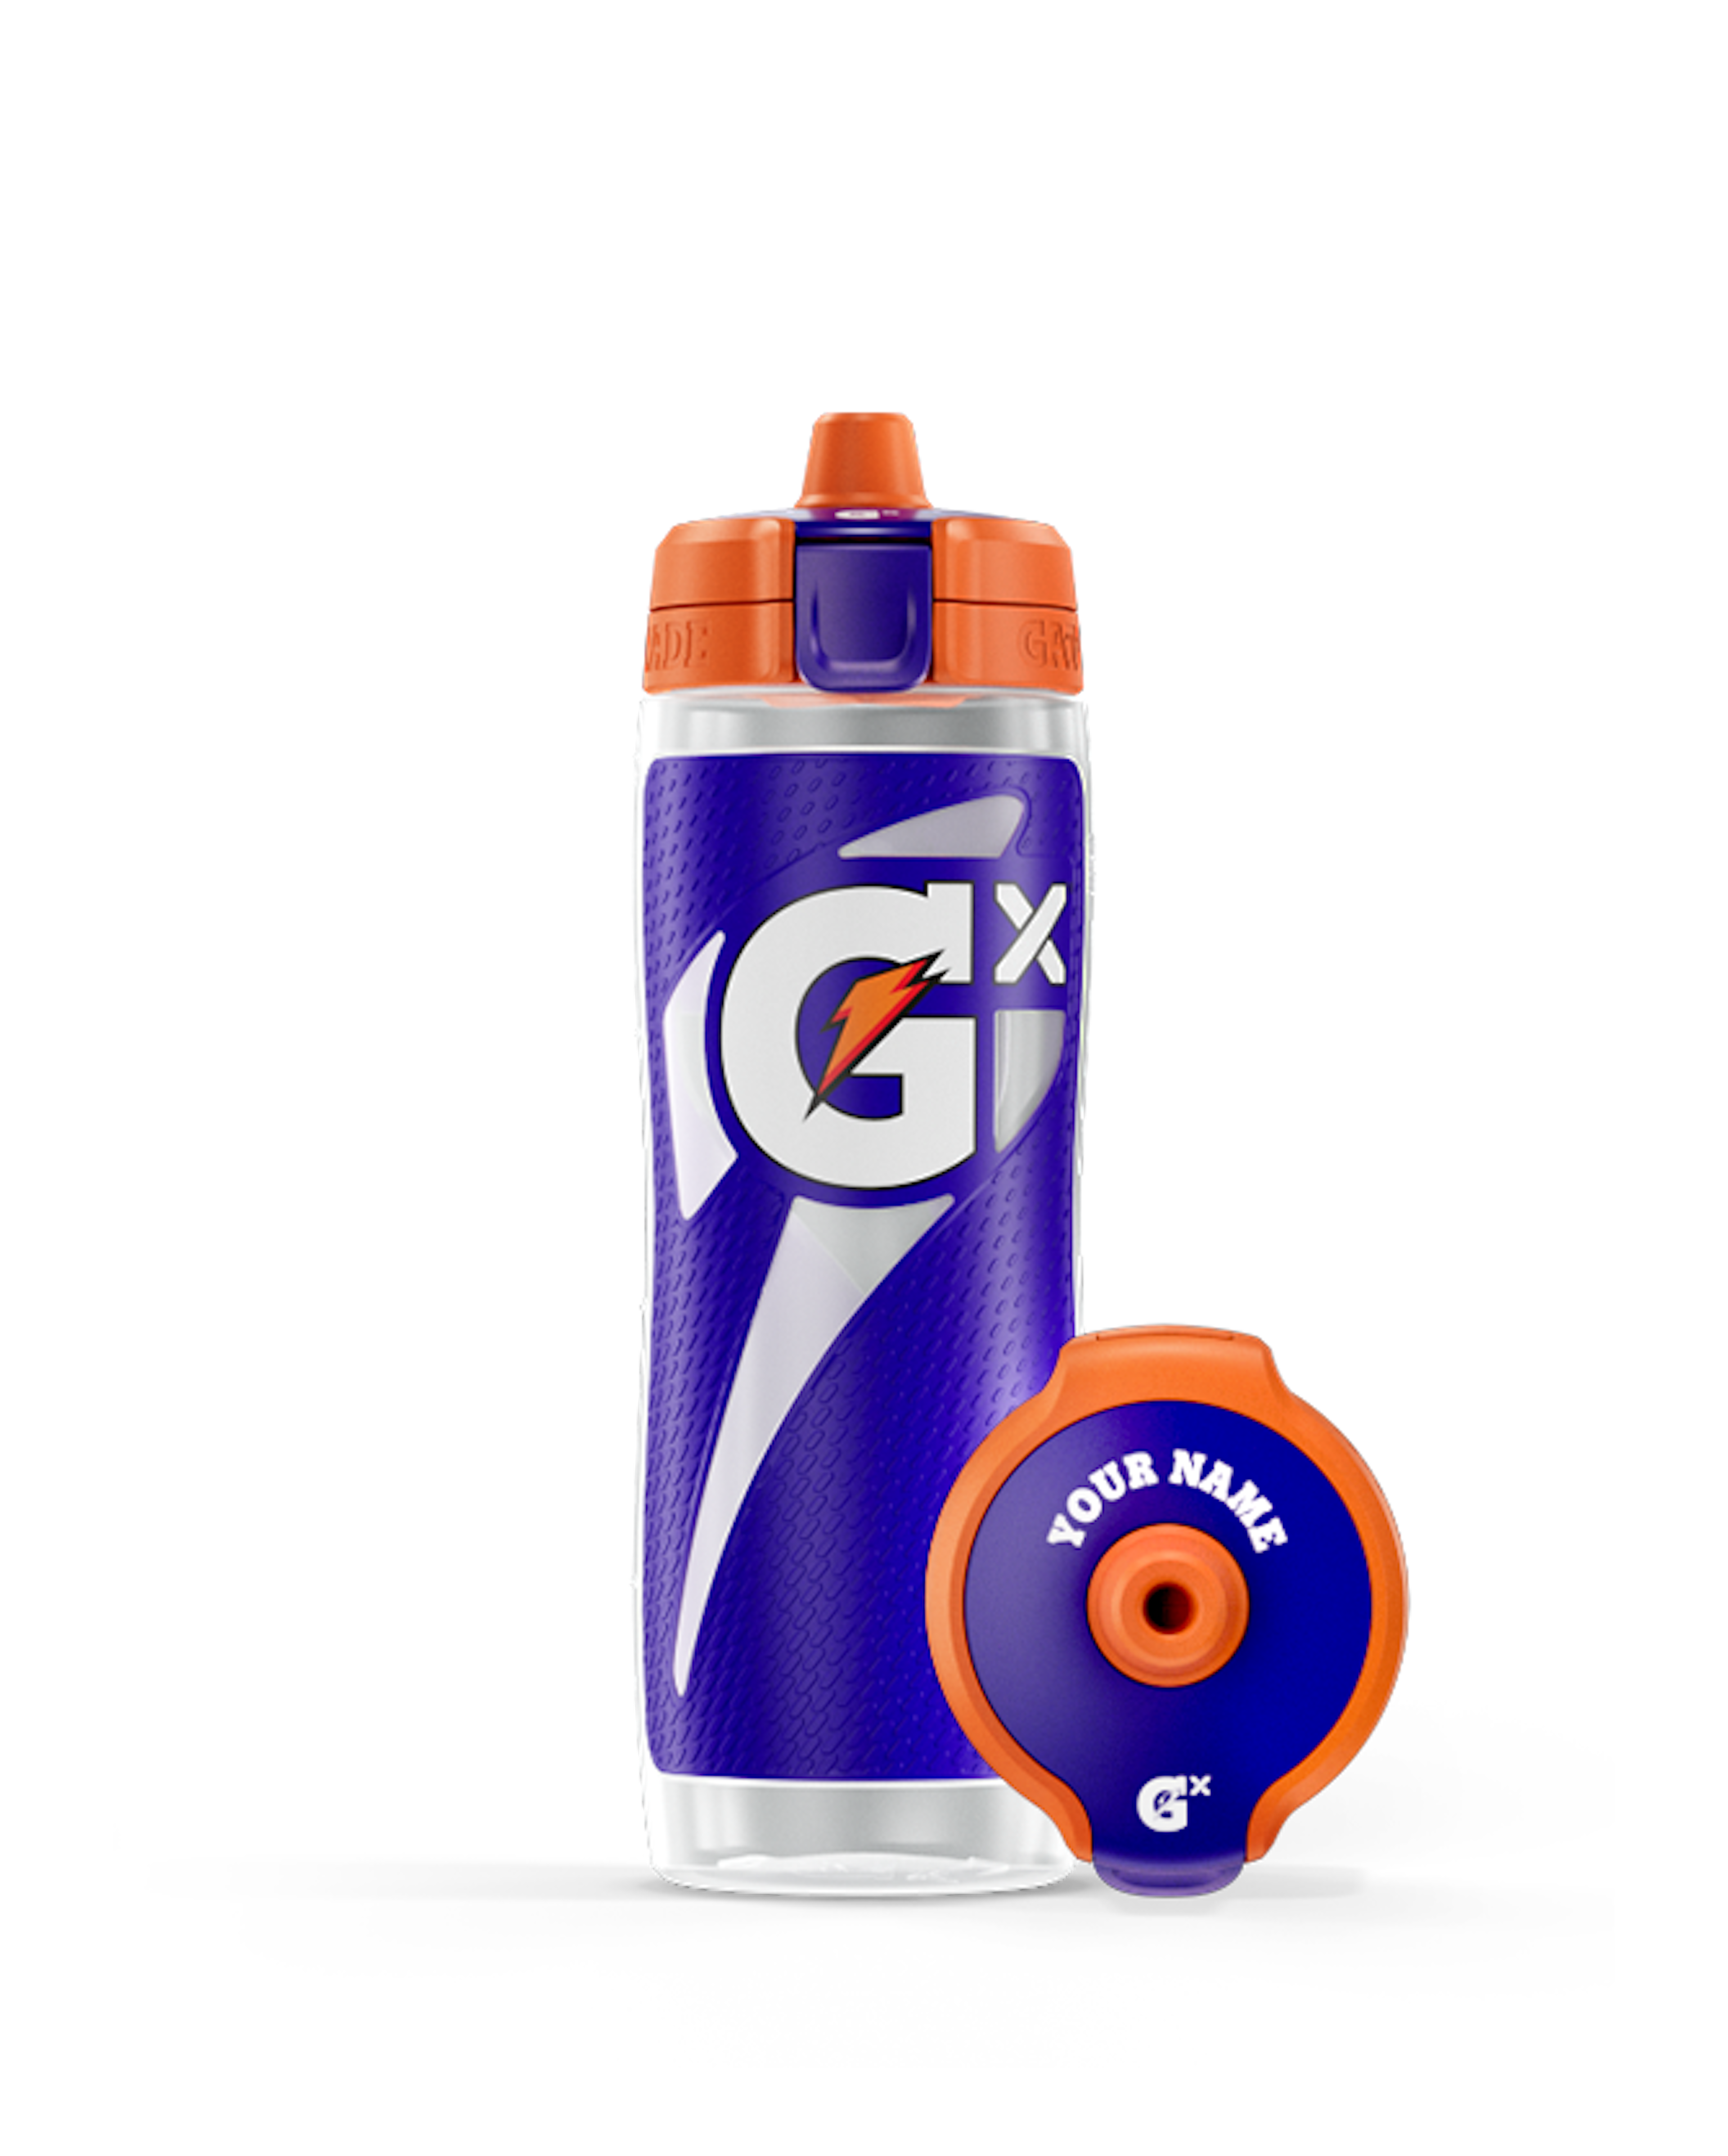 Gx Bottle with personalized lid